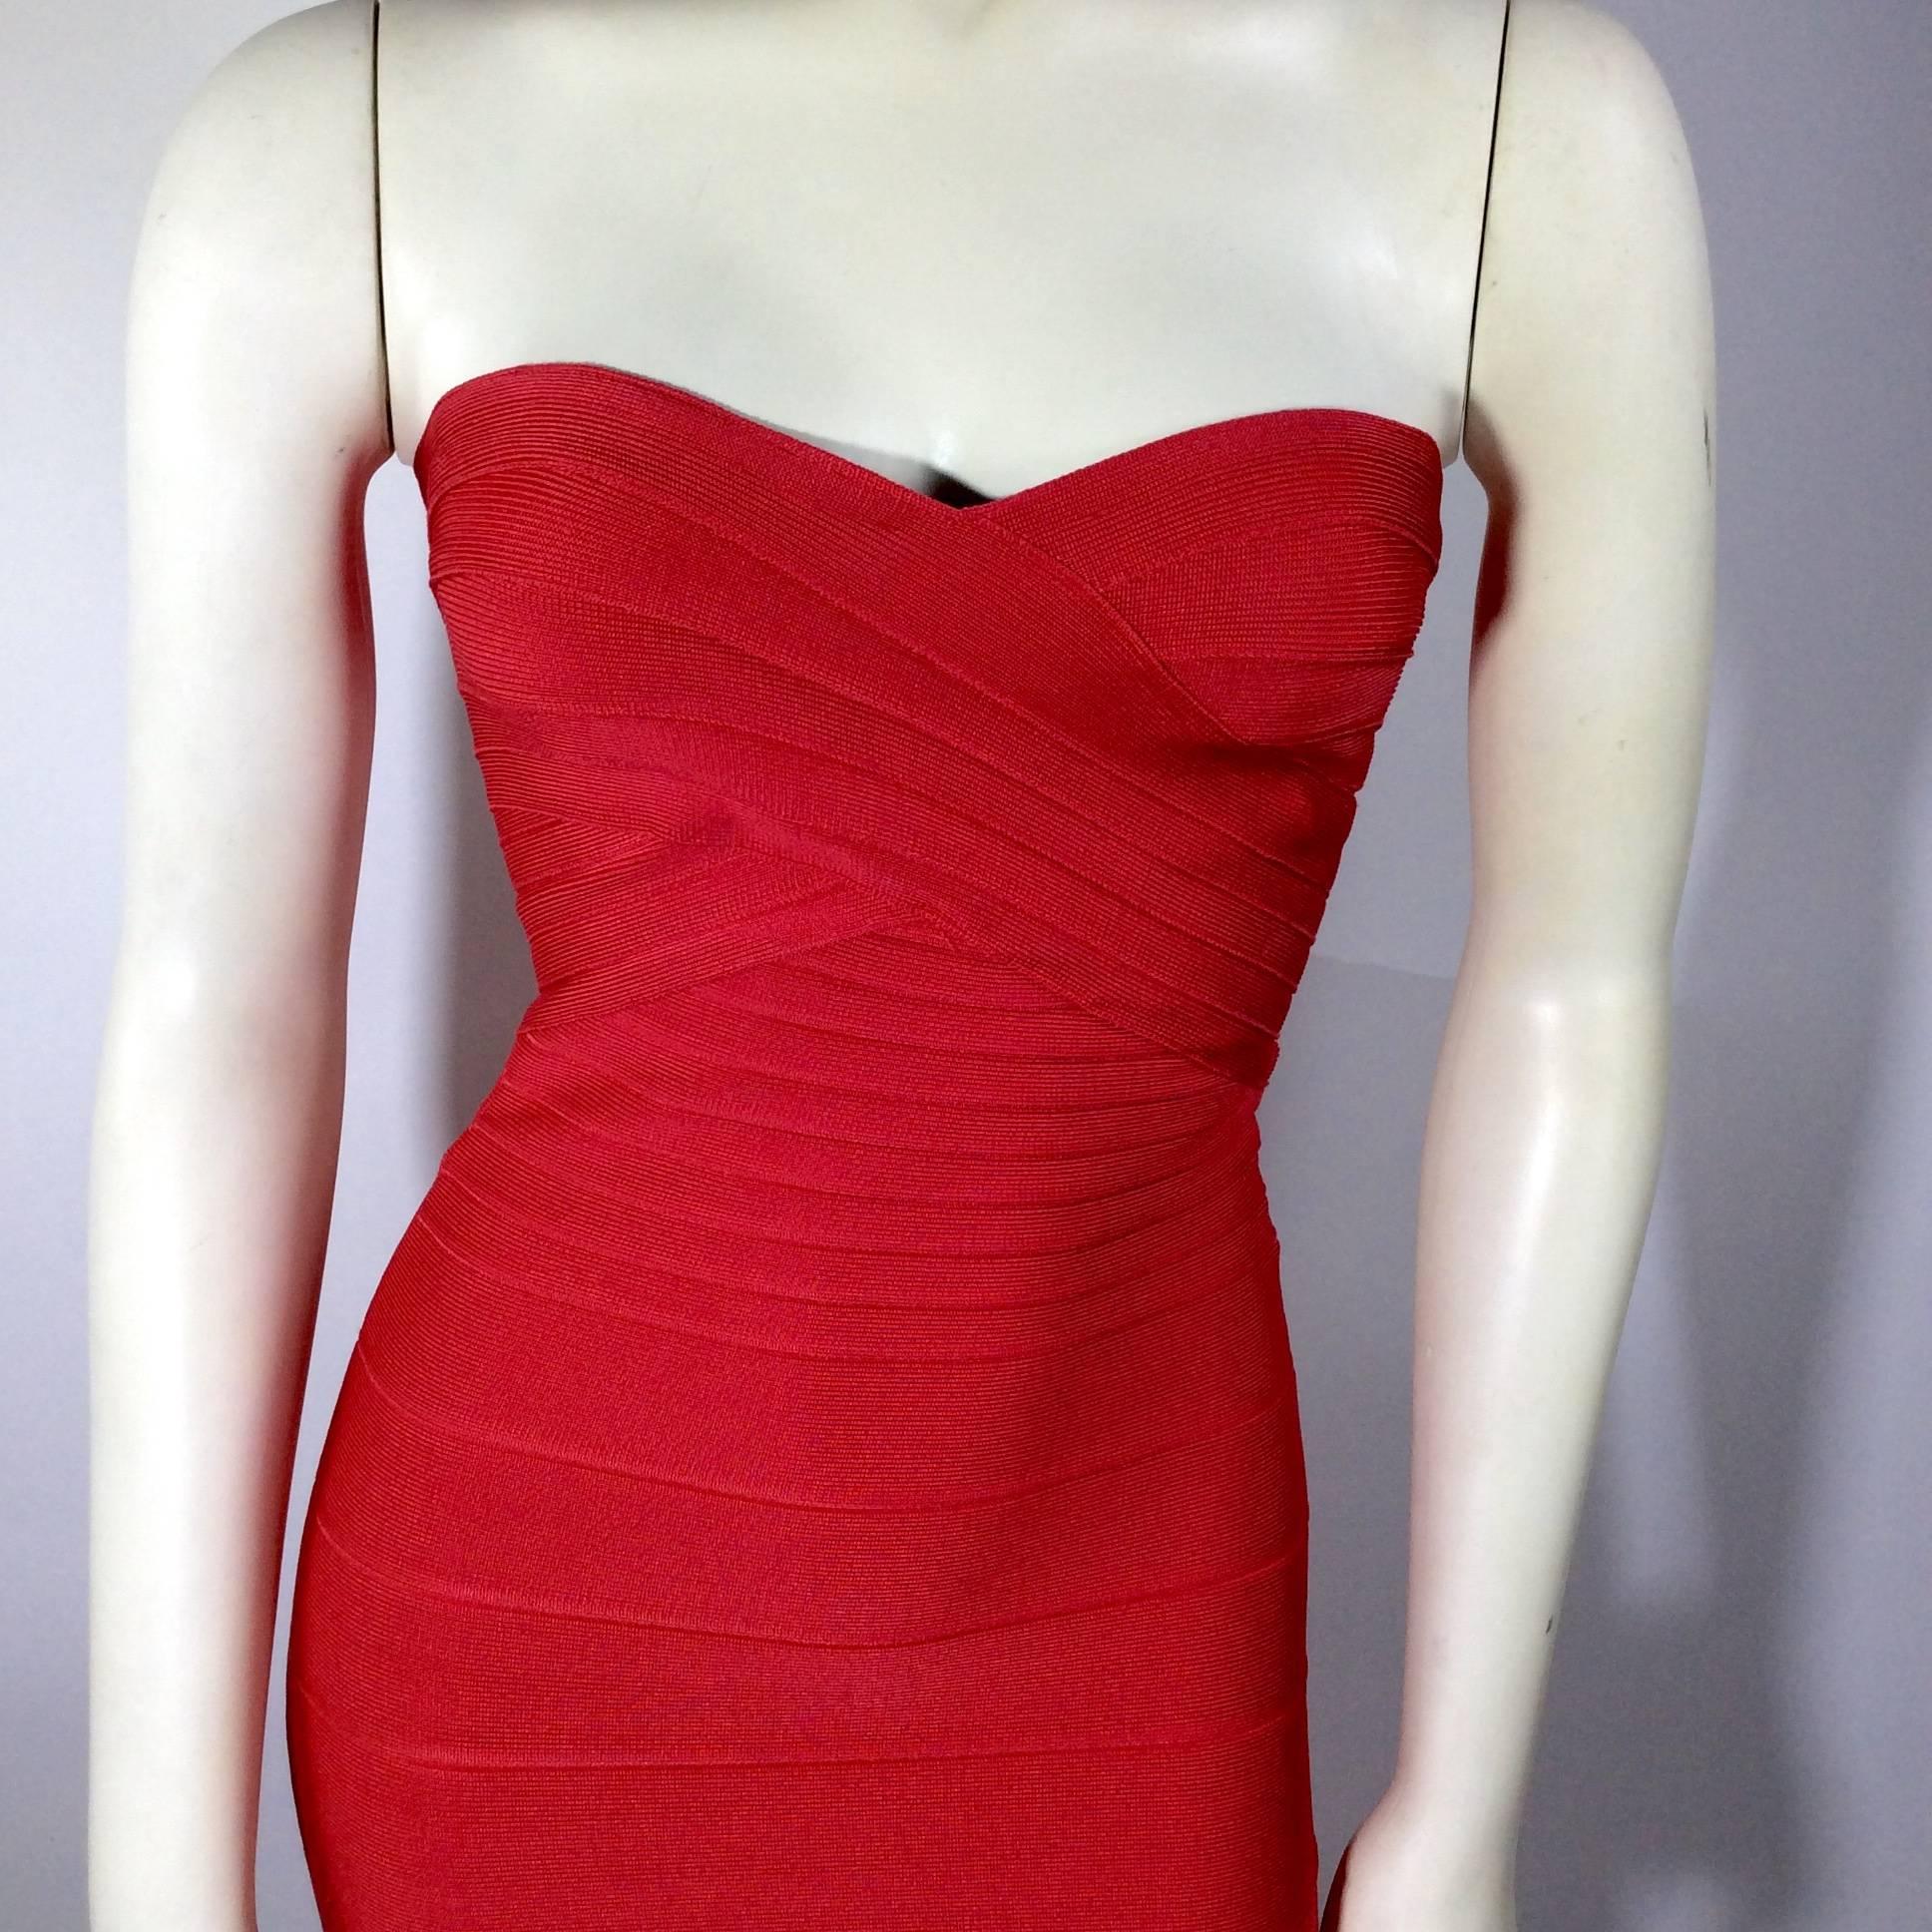 Herve Leger Red Strapless Bandage Dress In Good Condition For Sale In Narberth, PA